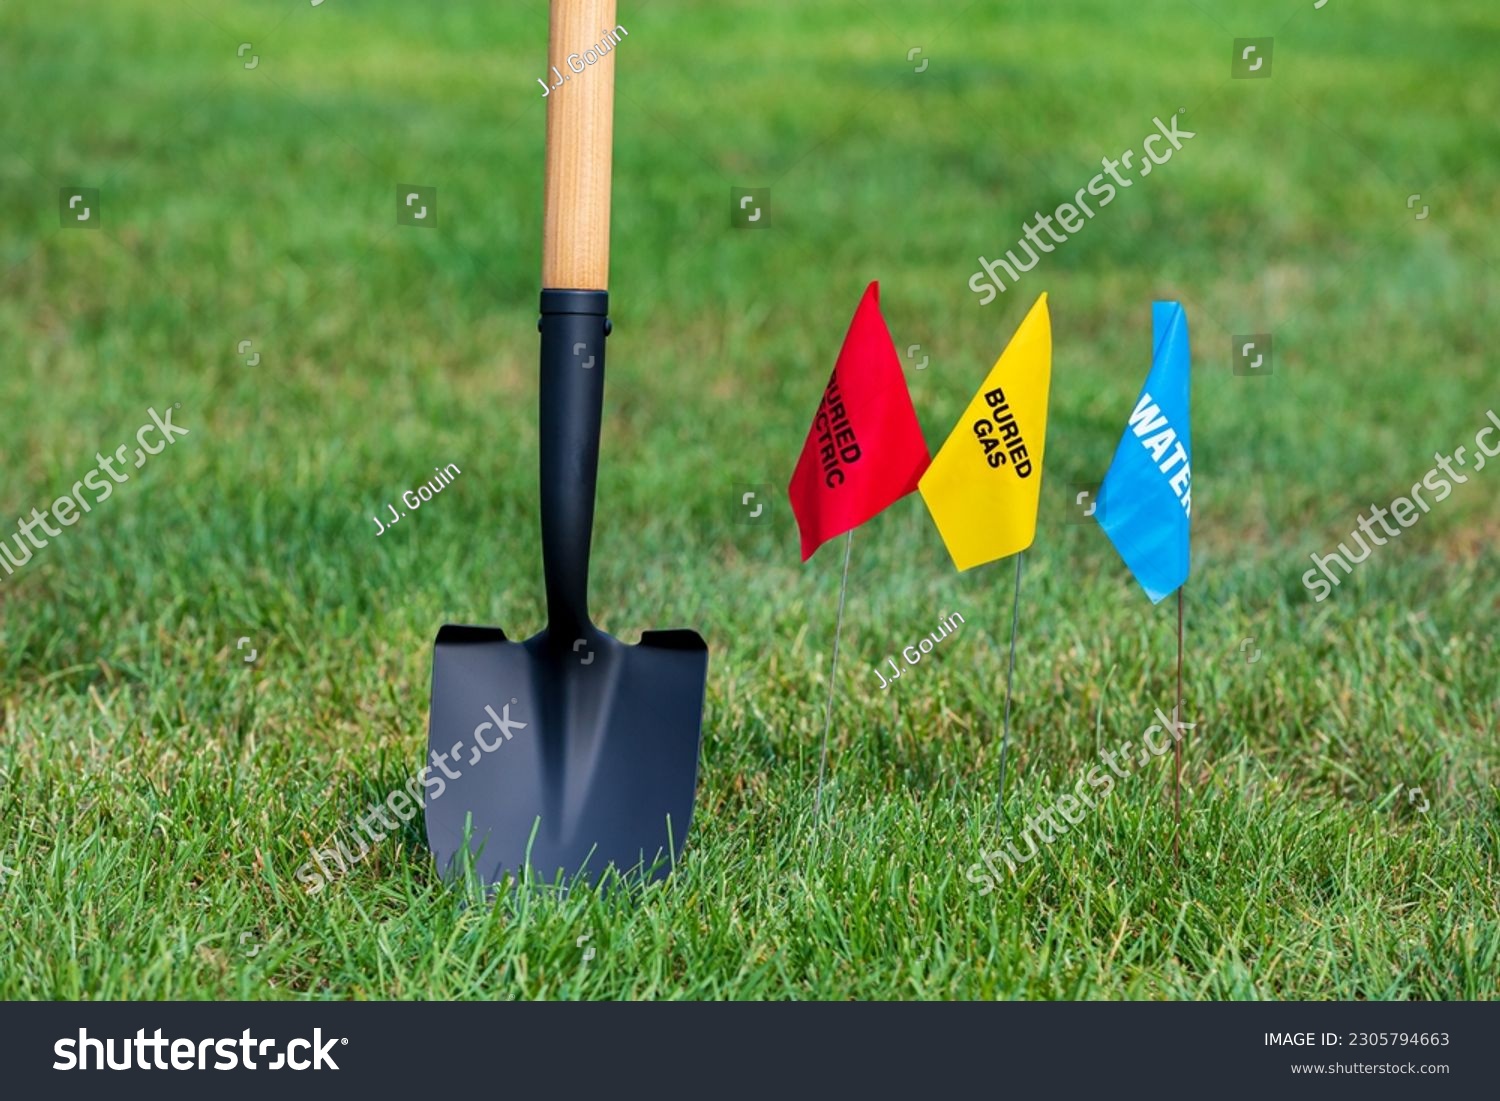 Buried electric, natural gas and water utility warning flag with shovel. Notify utility locate company for underground utilities, call before you dig and digging safety concept #2305794663